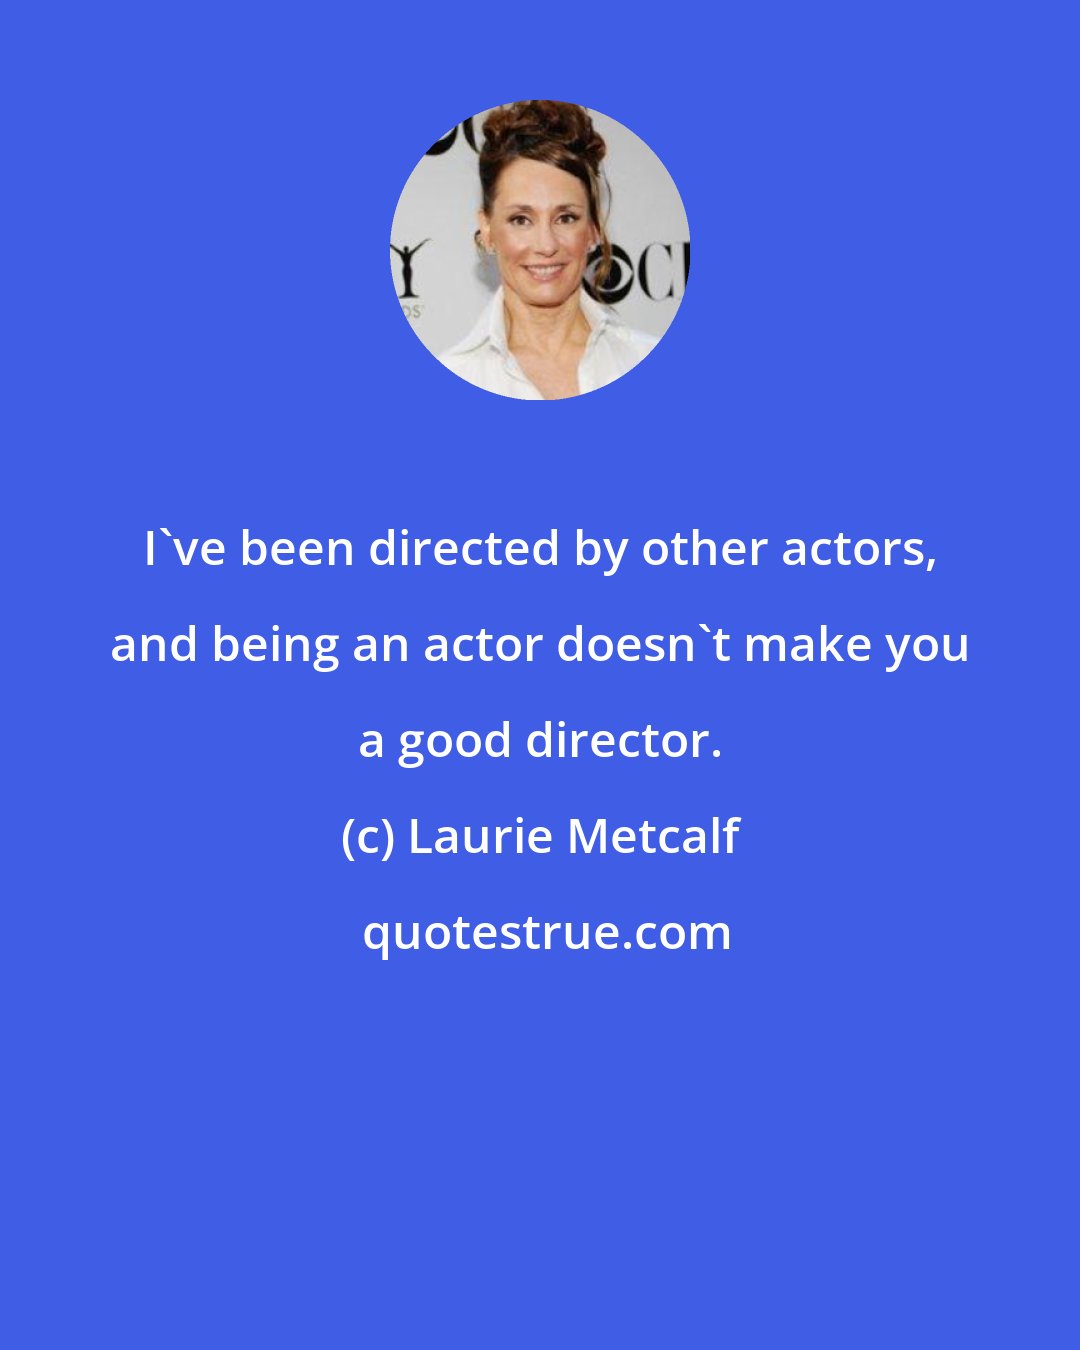 Laurie Metcalf: I've been directed by other actors, and being an actor doesn't make you a good director.